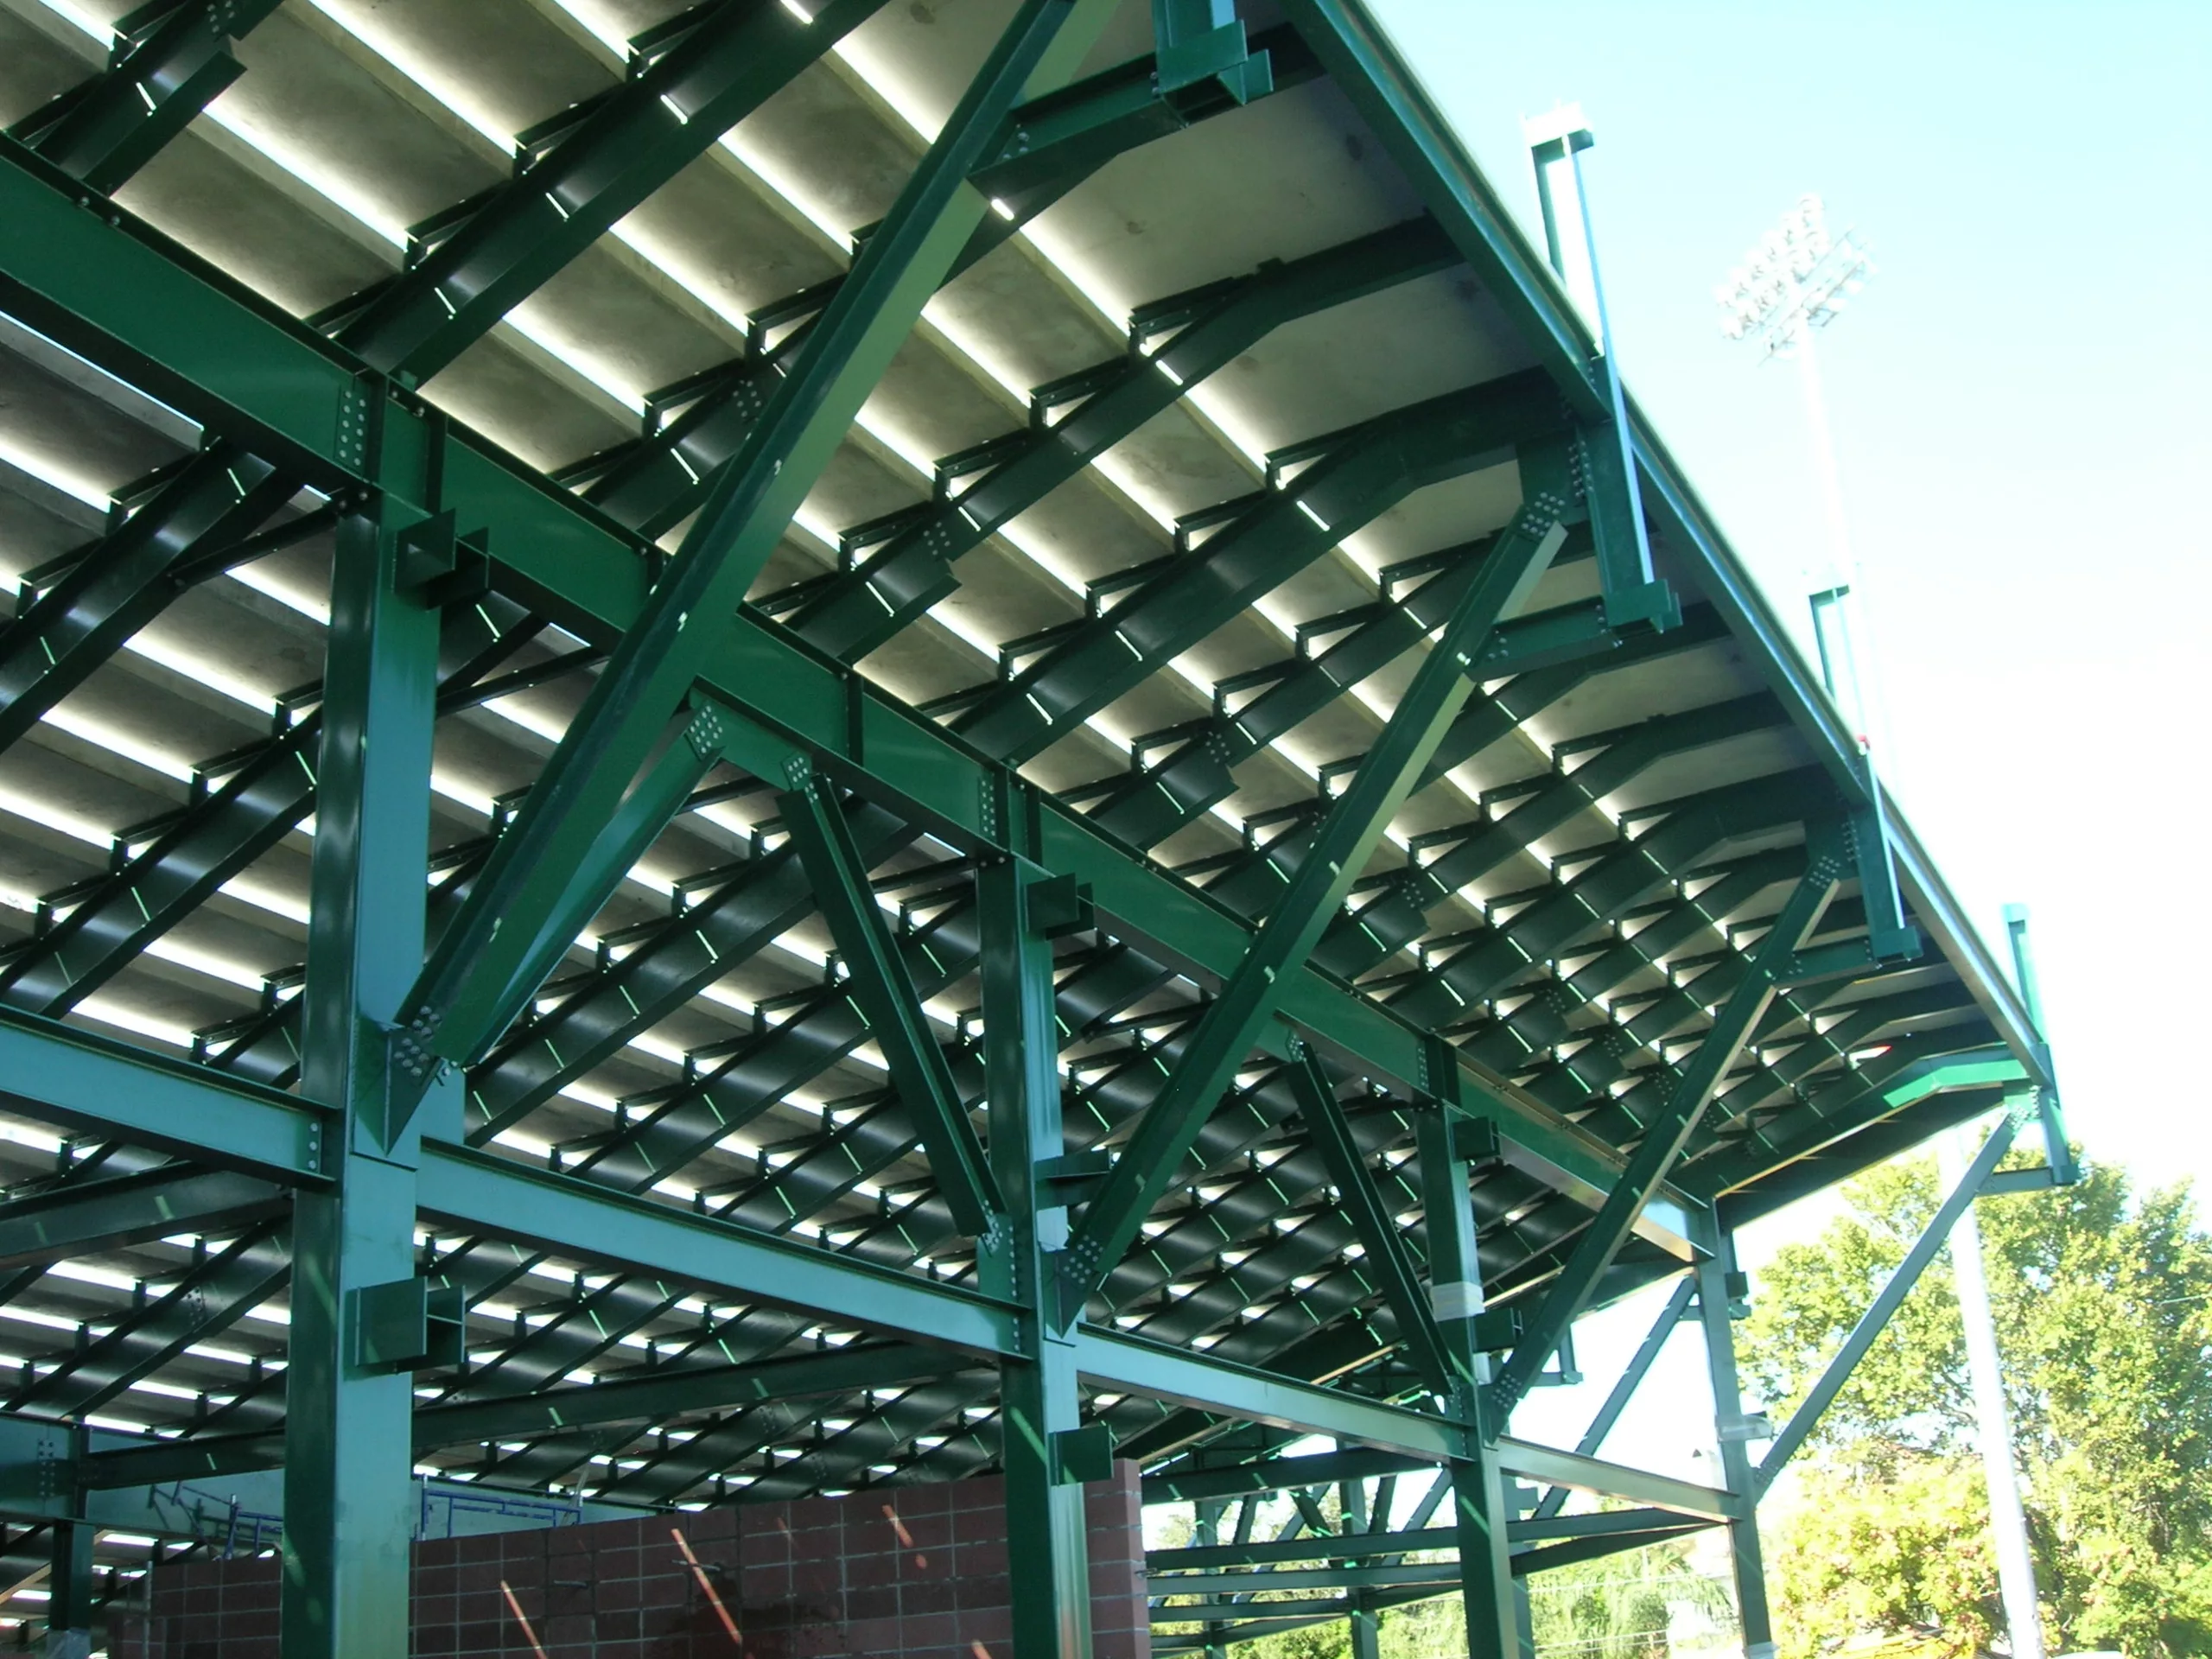 Steel support structure for hybrid precast system - steel features a green powder coated finish